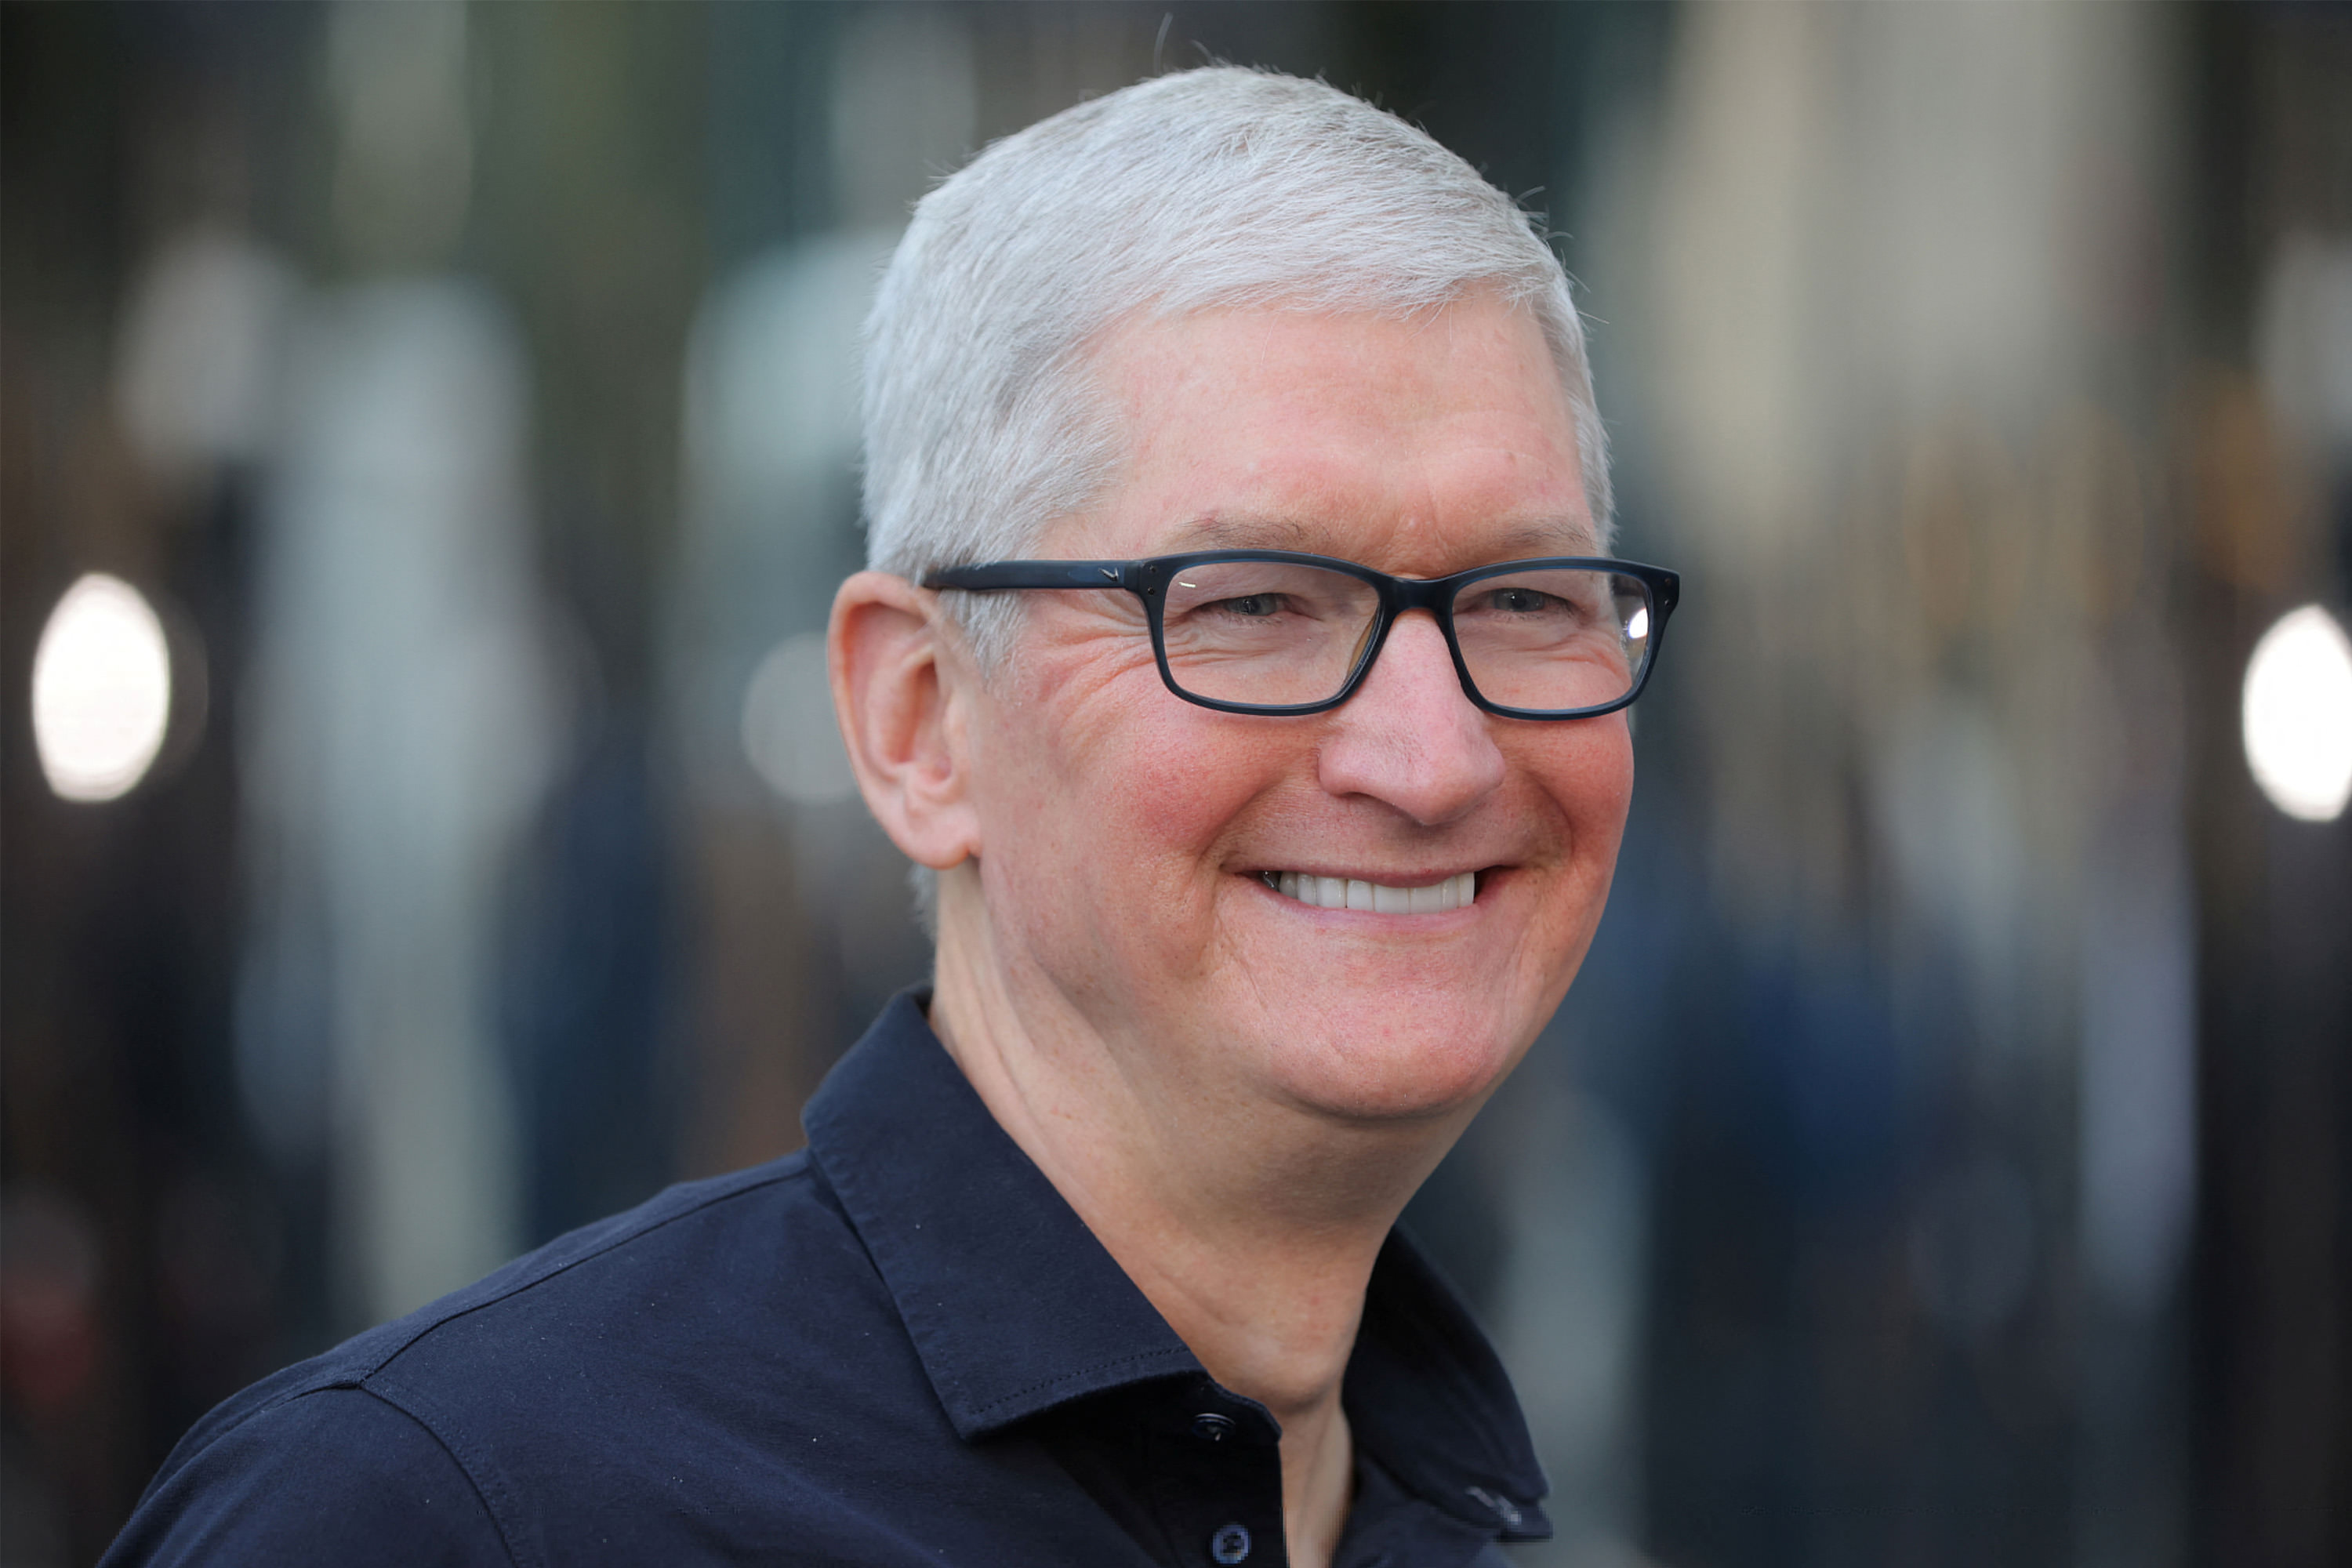 2022 11 tim cook apple ceo happy smile glasses daylight 638bb90a0677c064ac282c46